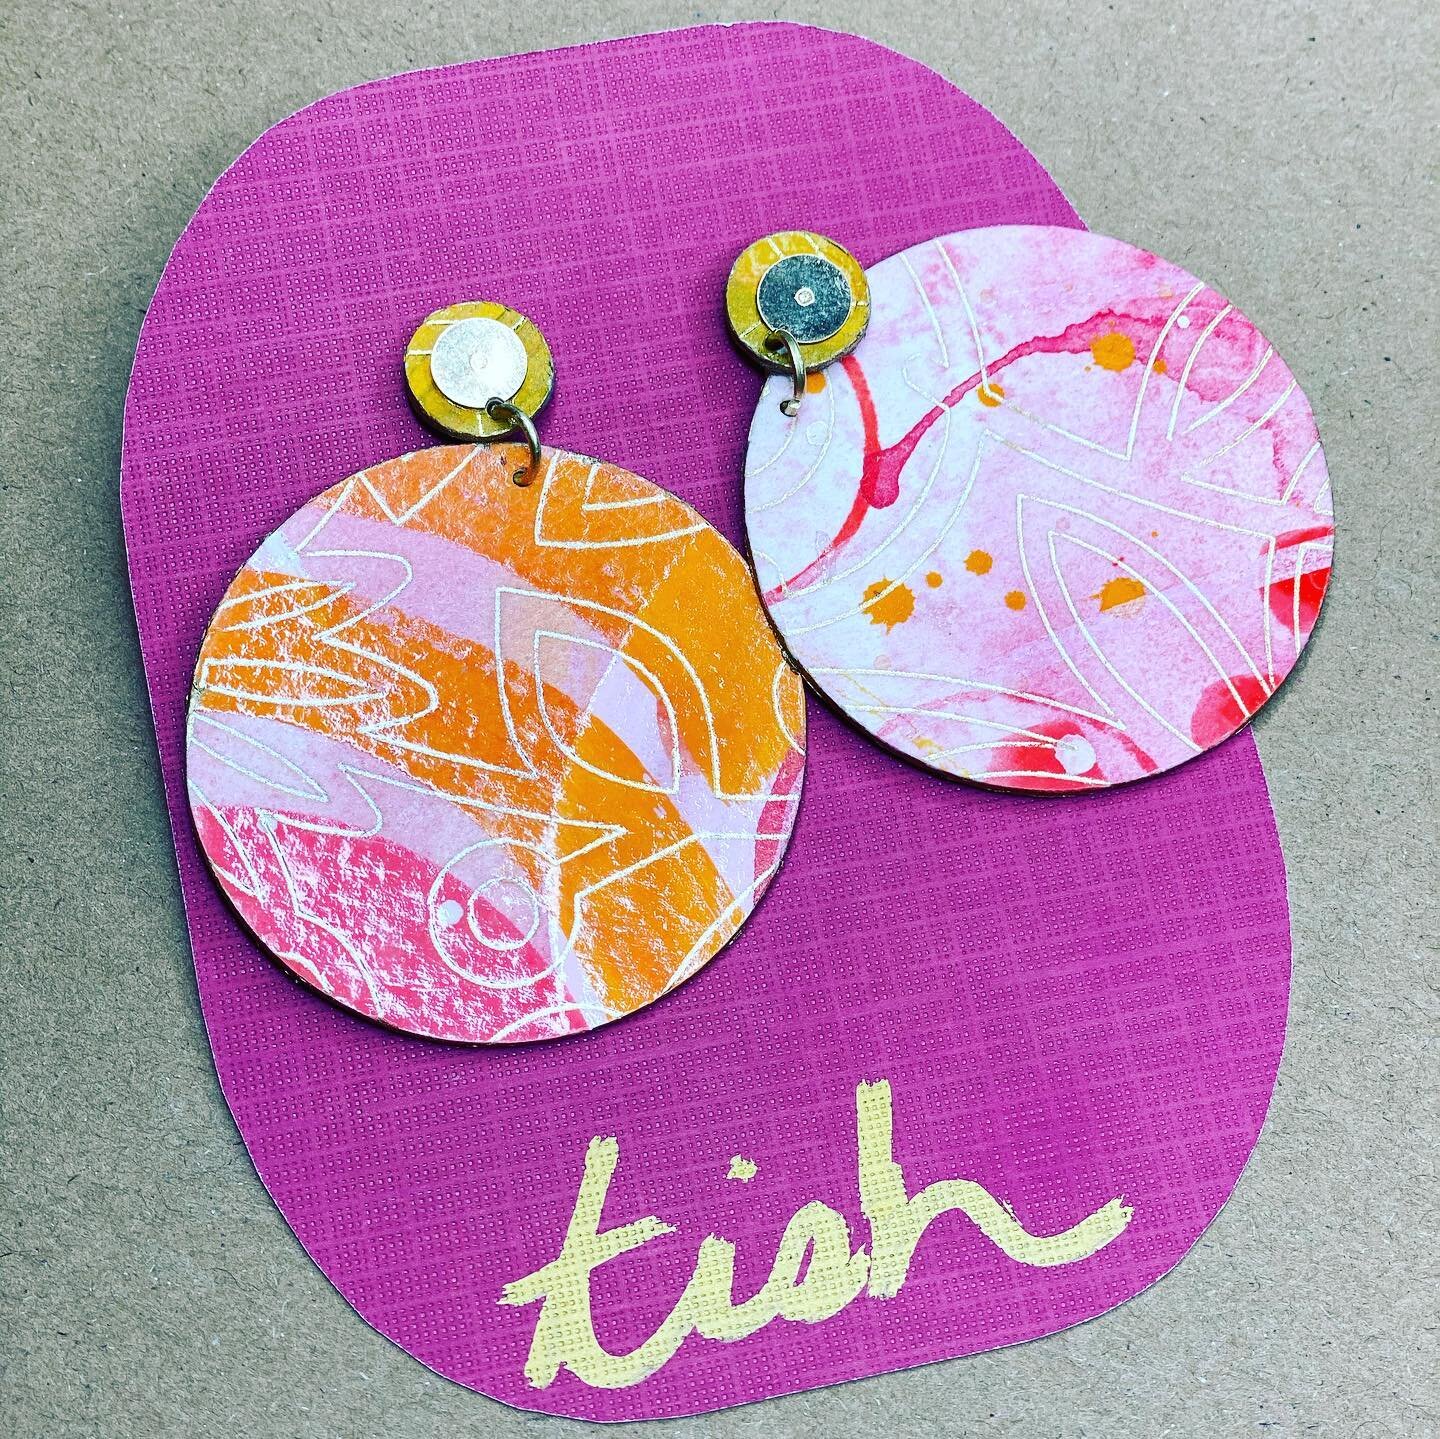 Made a few hand-painted earrings from painted paper, embossed with gold foil 🤩 Each pair is completely unique! 

I love throwing these on with jeans and a t-shirt. No need to match. Just rock that color! 

#paintedearrings #paperearrings #earrings #